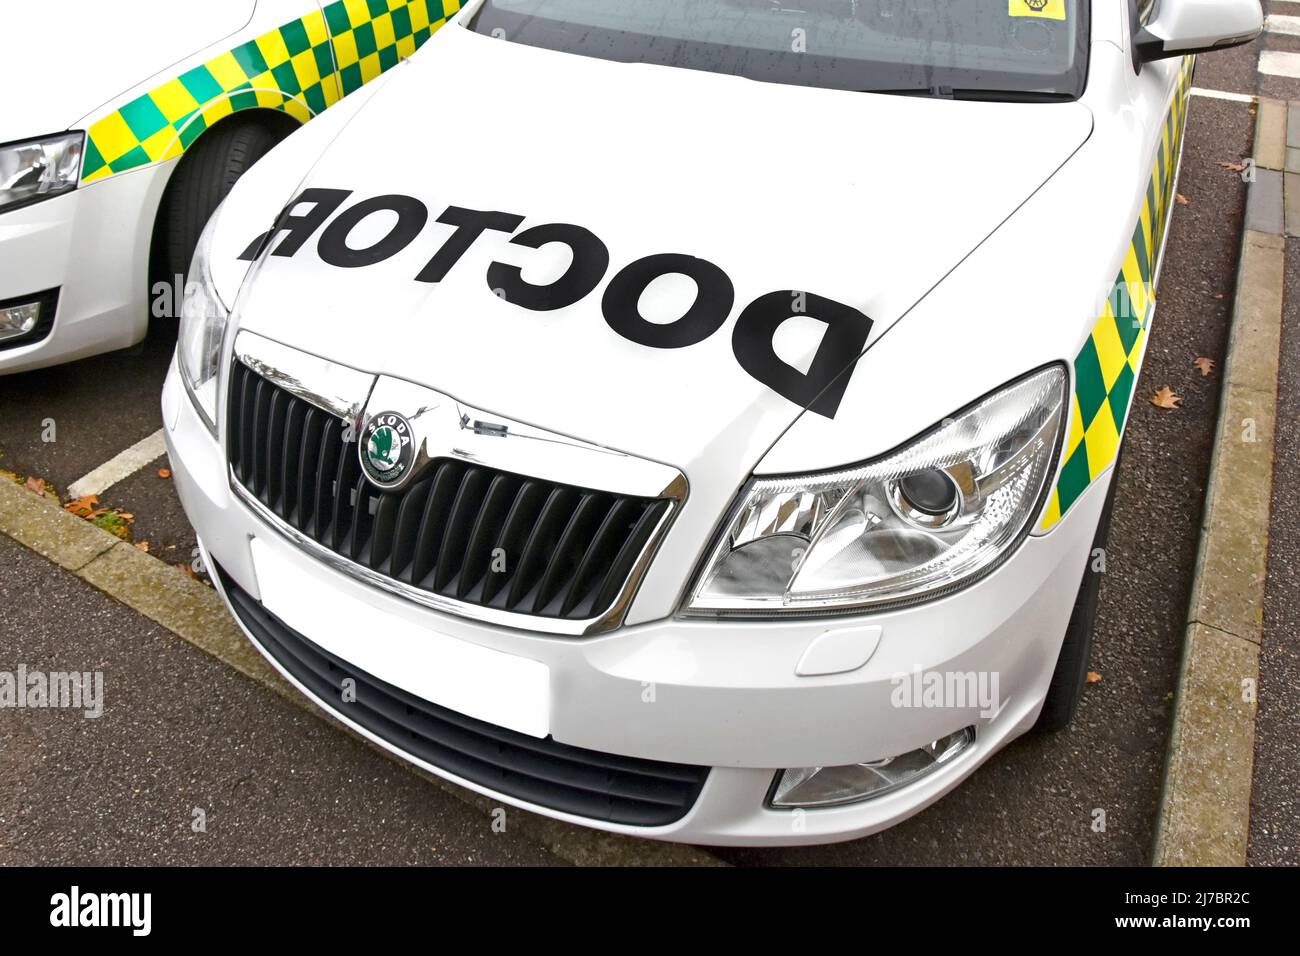 Front view white Skoda NHS doctors car emergency healthcare transport vehicle reverse text letters image on bonnet obscured number plate England UK Stock Photo